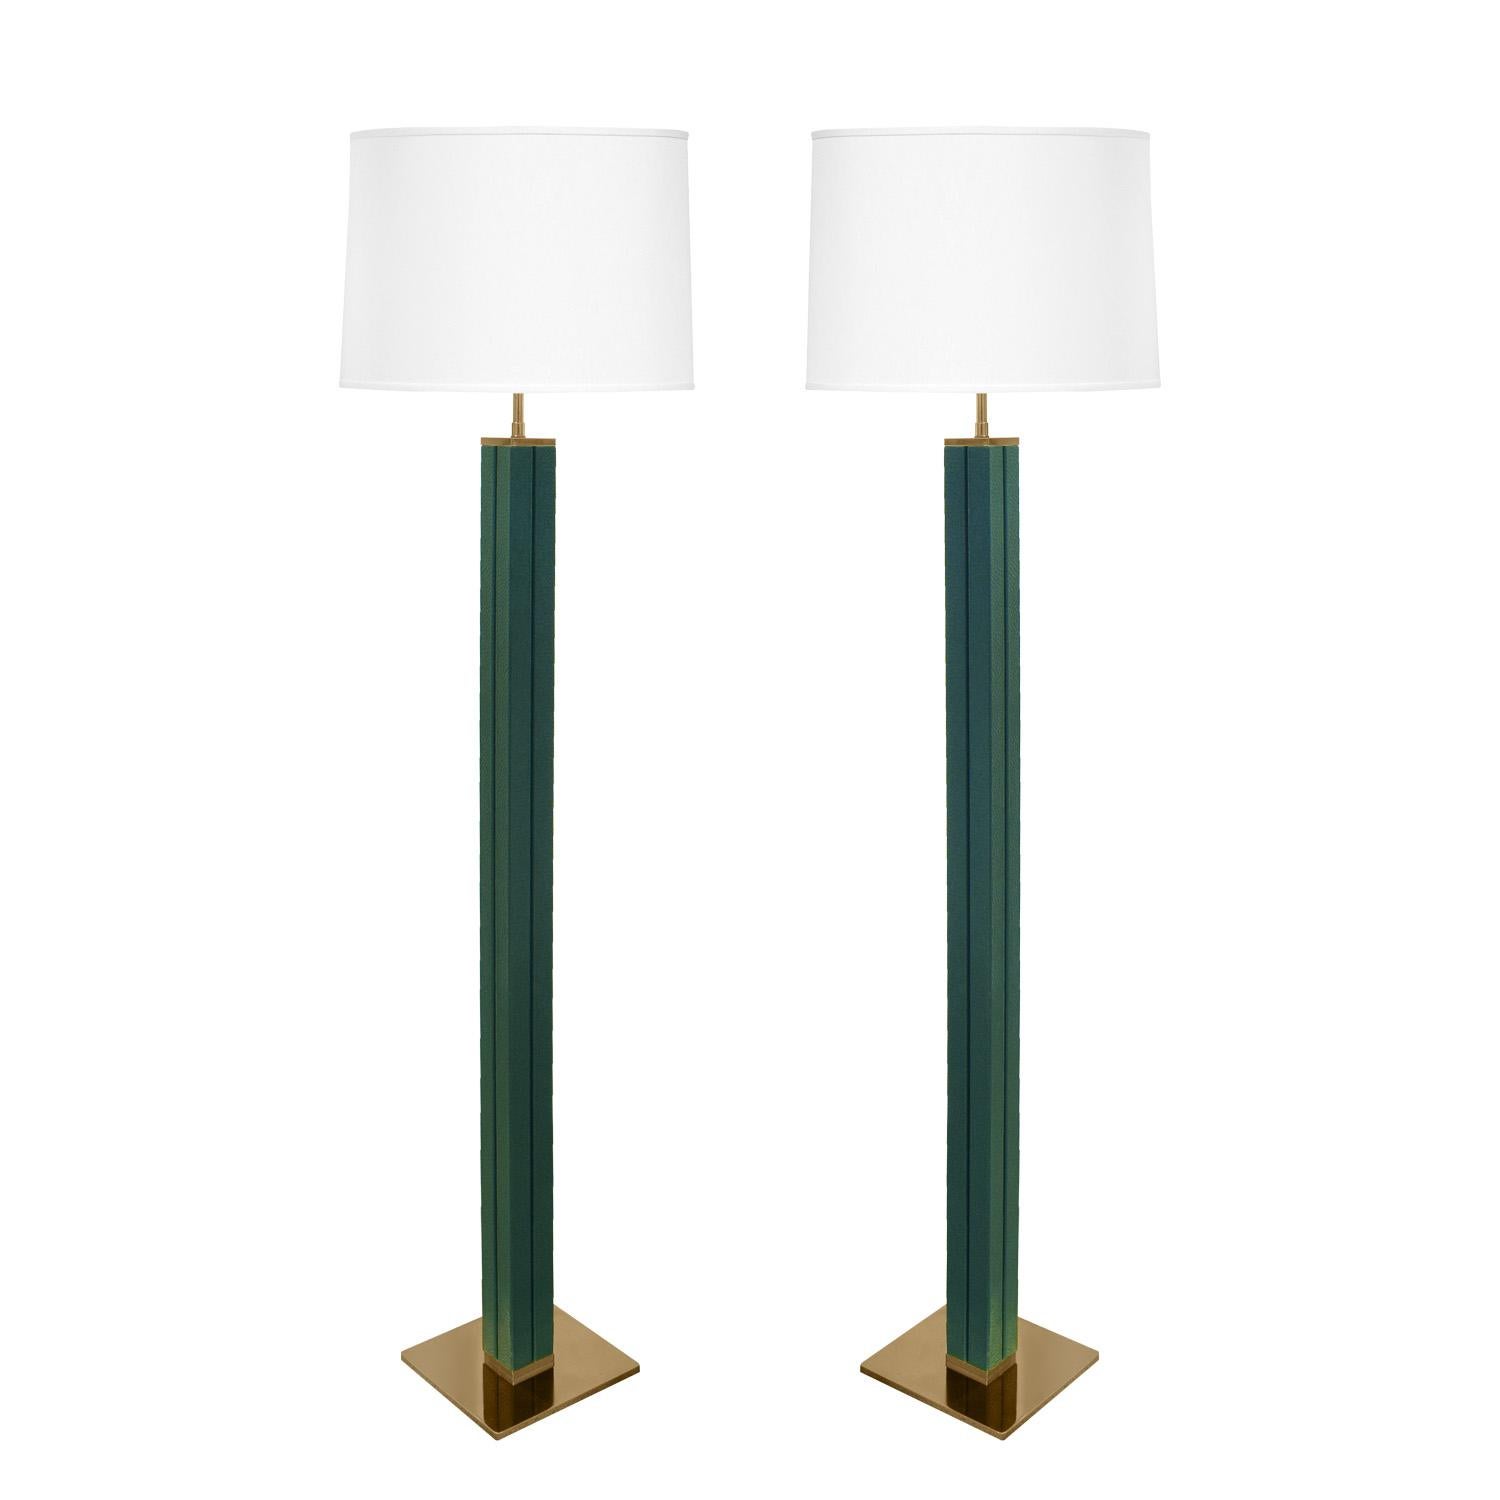 Exceptional pair of floor lamps with square channeled columns covered in forest green embossed emu leather with polished brass bases and hardware by Karl Springer, American 1970's.

Reference:
Karl Springer LTD small paper catalog published in